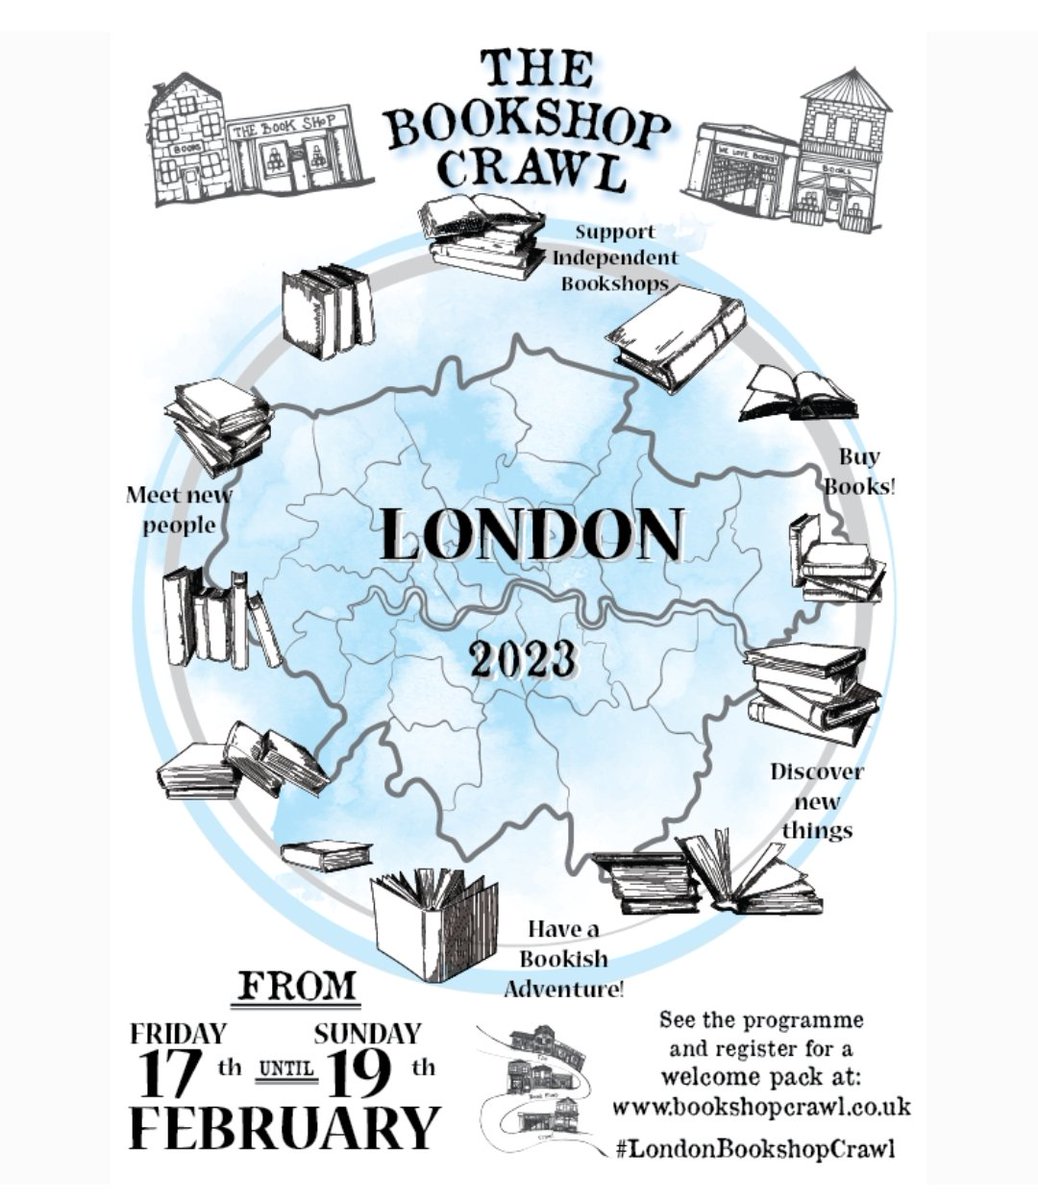 Happy New Year! If you're a person who loves bookshops, please RT this & help us spread the word about London Bookshop Crawl 2023, February 17th-19th. Explore the bookshops of London!

bookshopcrawl.co.uk
#LondonBookshopCrawl #bookshopcrawl